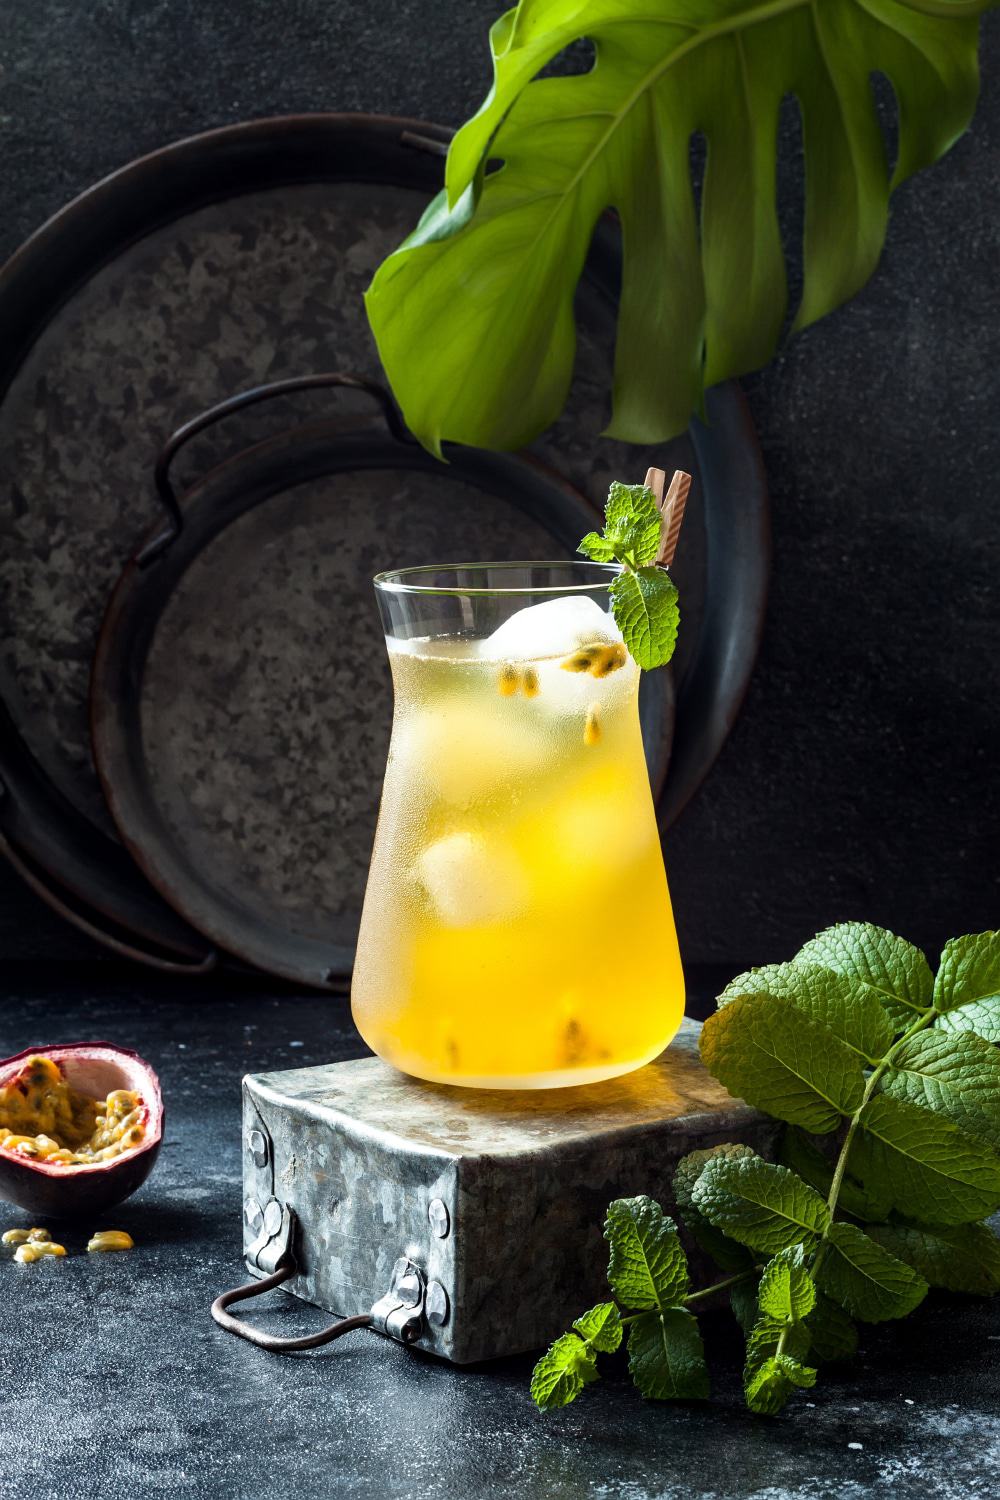 Tangy Passion Fruit Iced Tea | Cooking Clue | The Eater's Manifesto